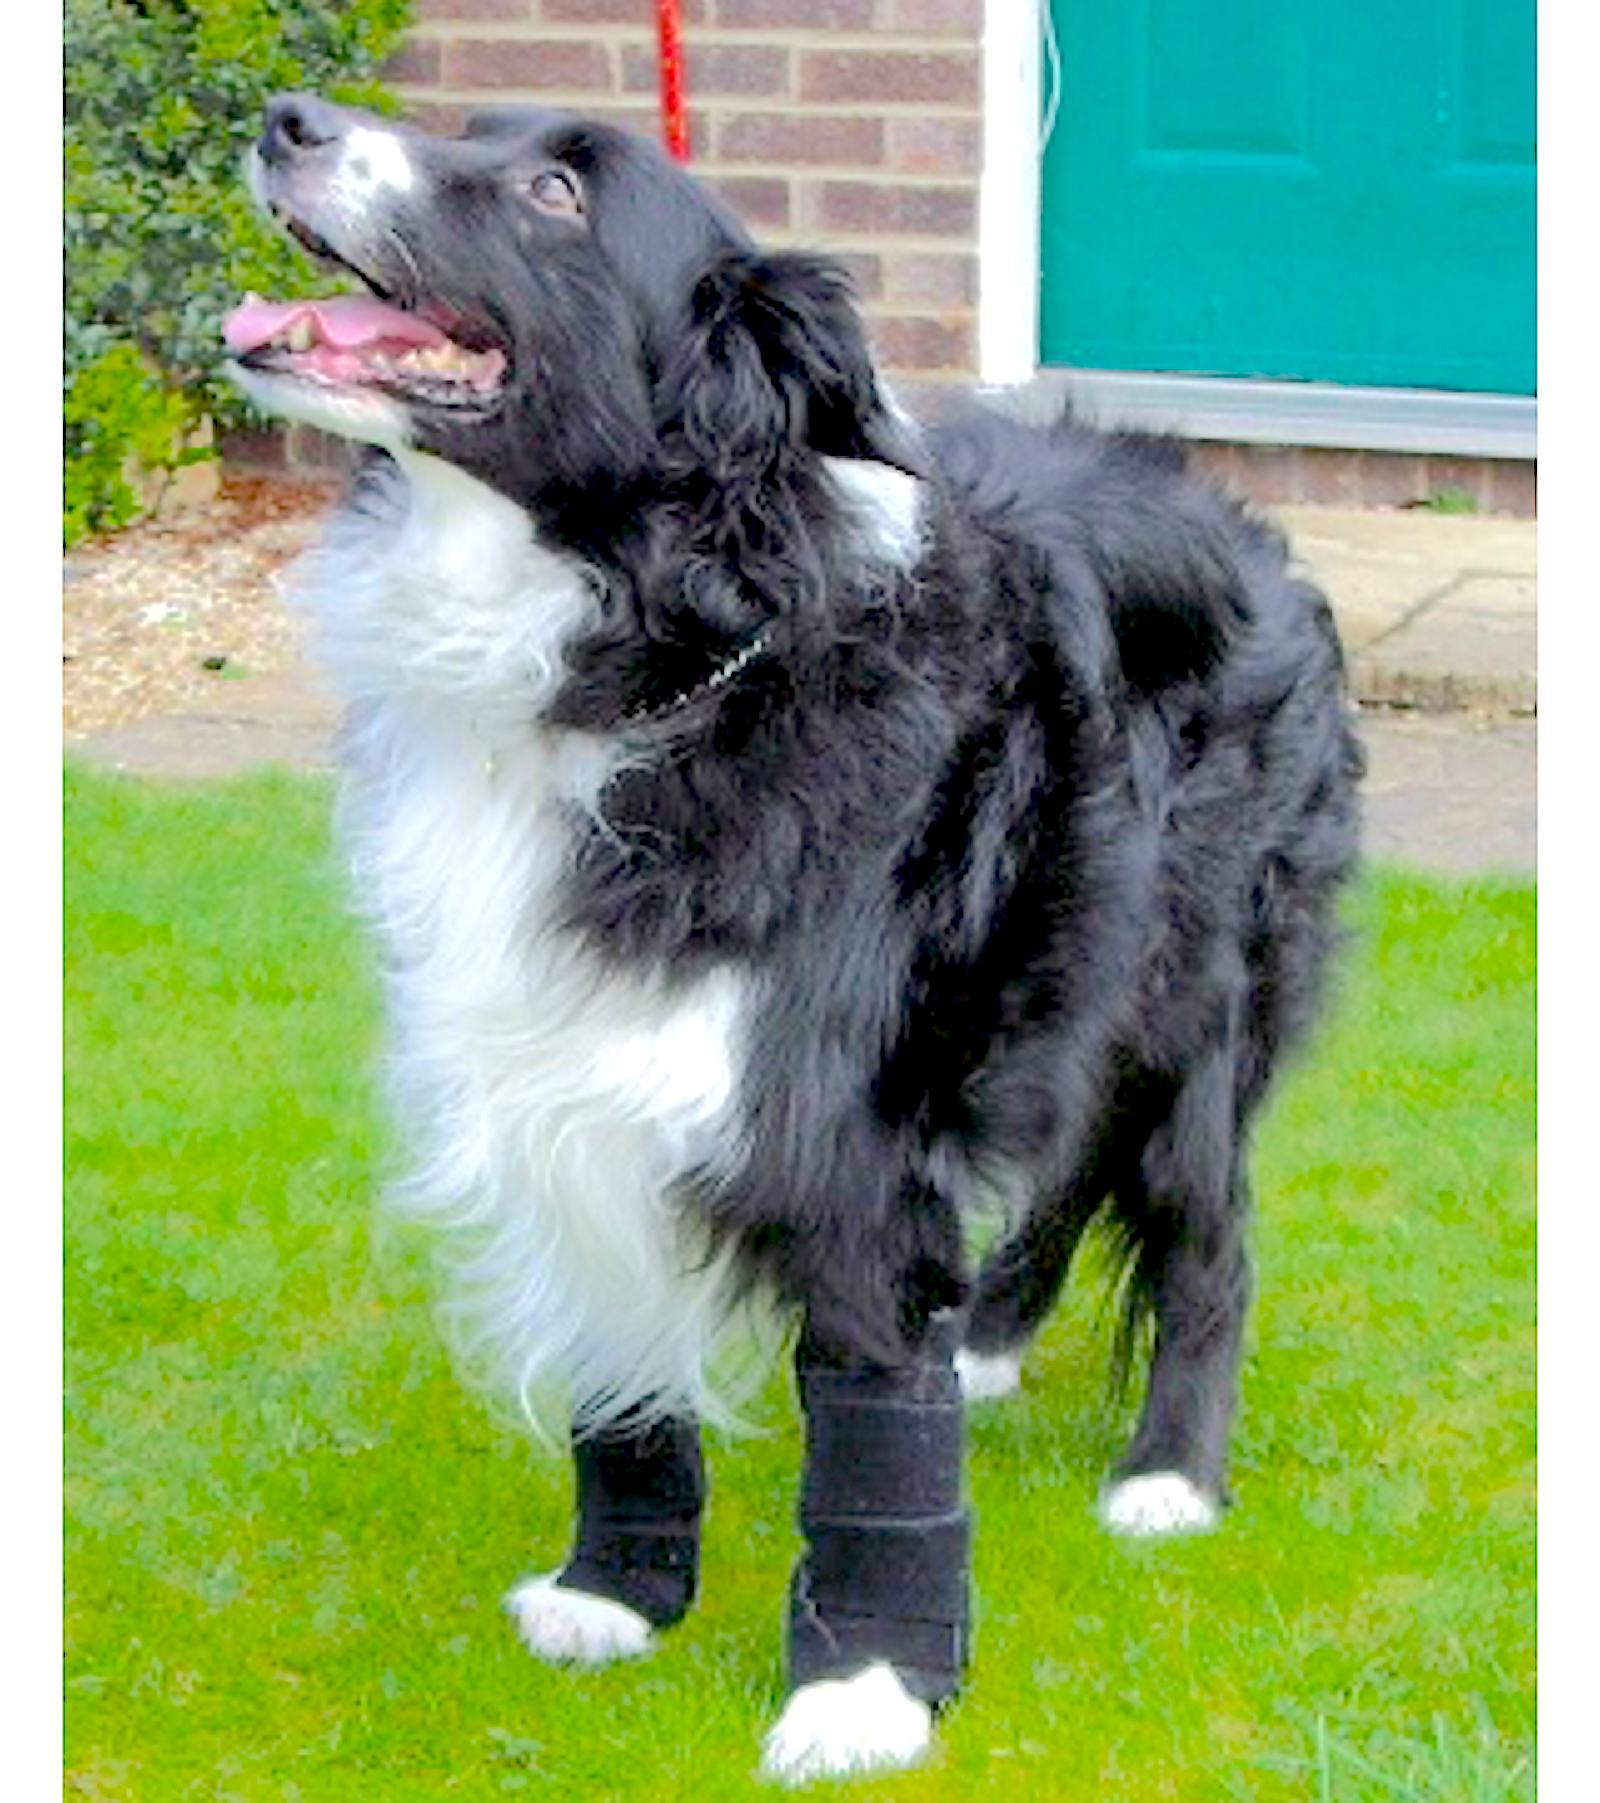 THERAPAW-UK: custom wrist and ankle braces for injuries, pain, deviations - Vital Vet